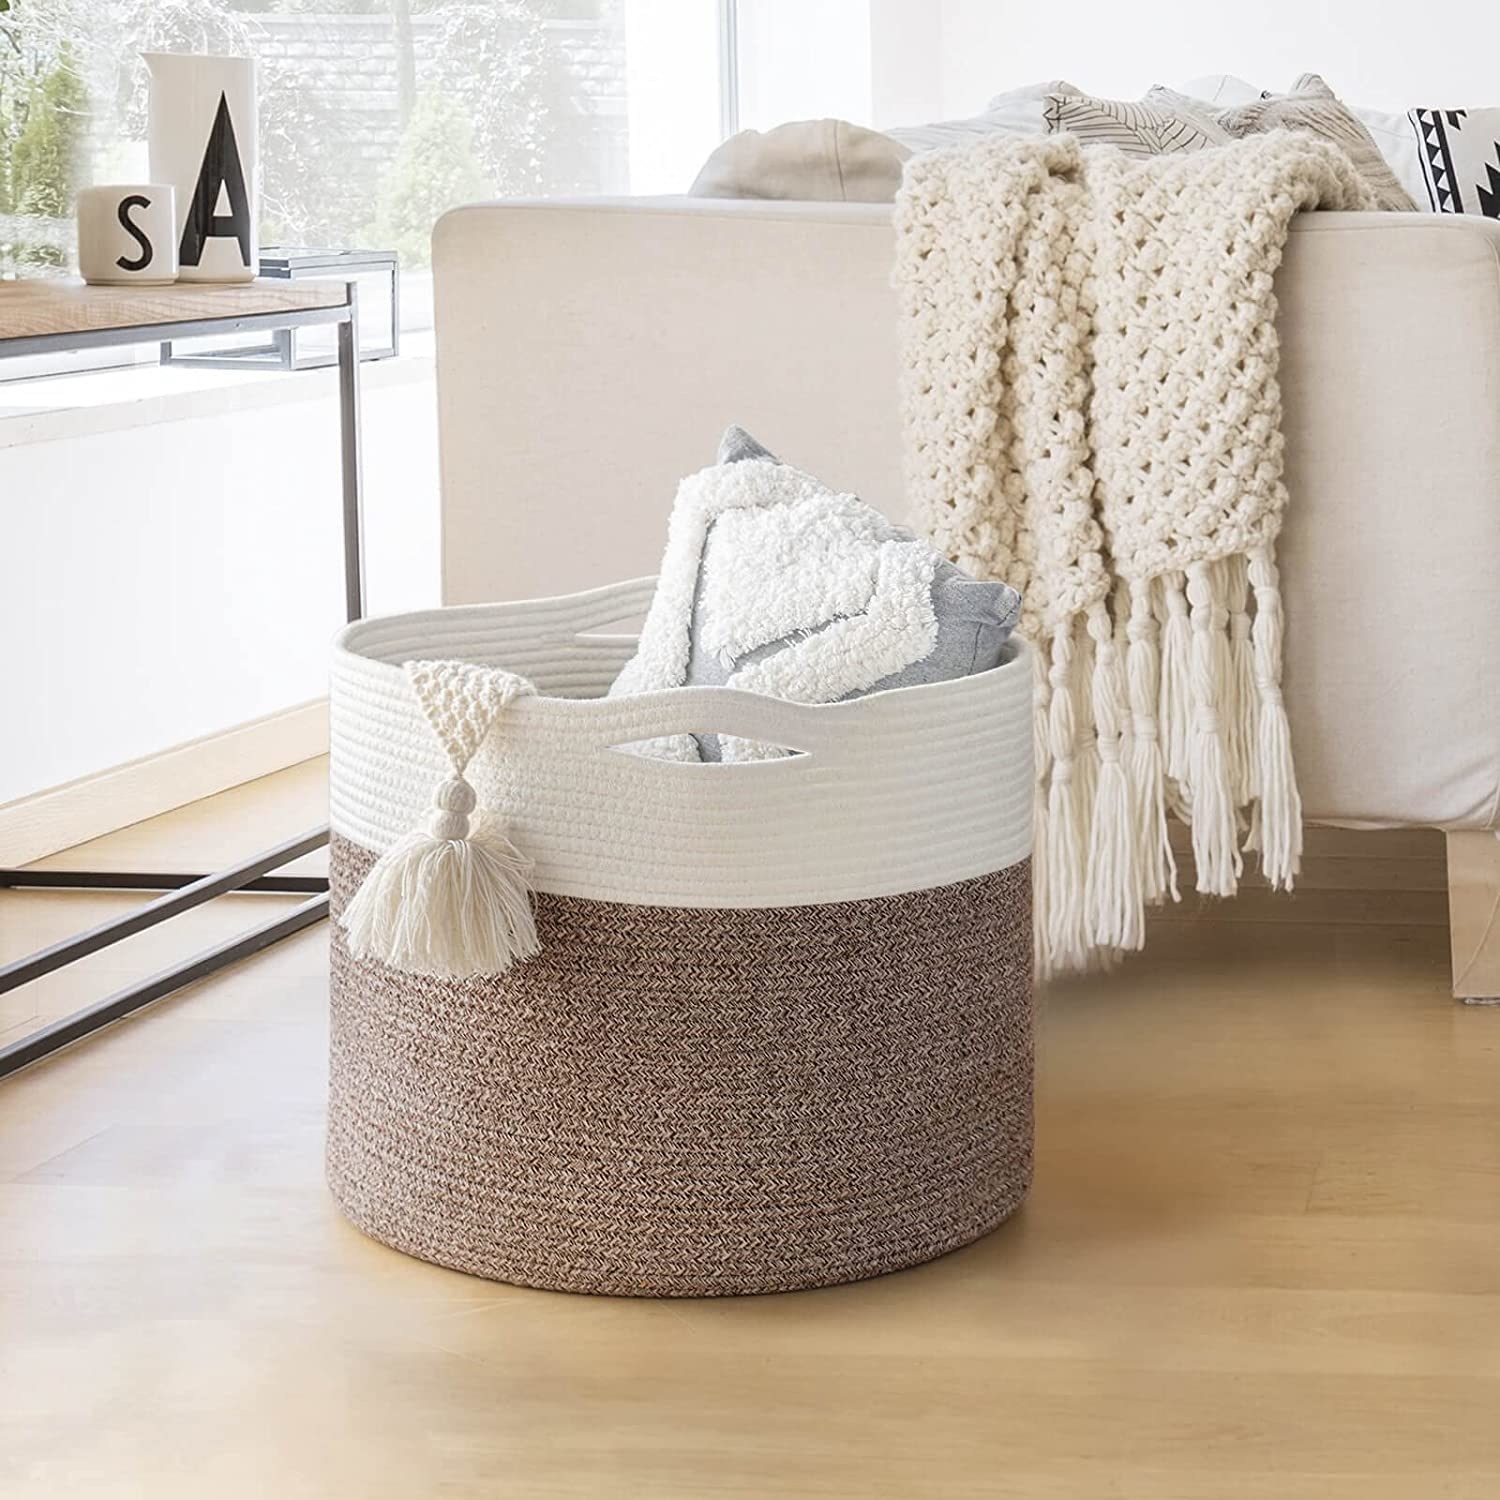 A rope basket holding a blanket in a living room